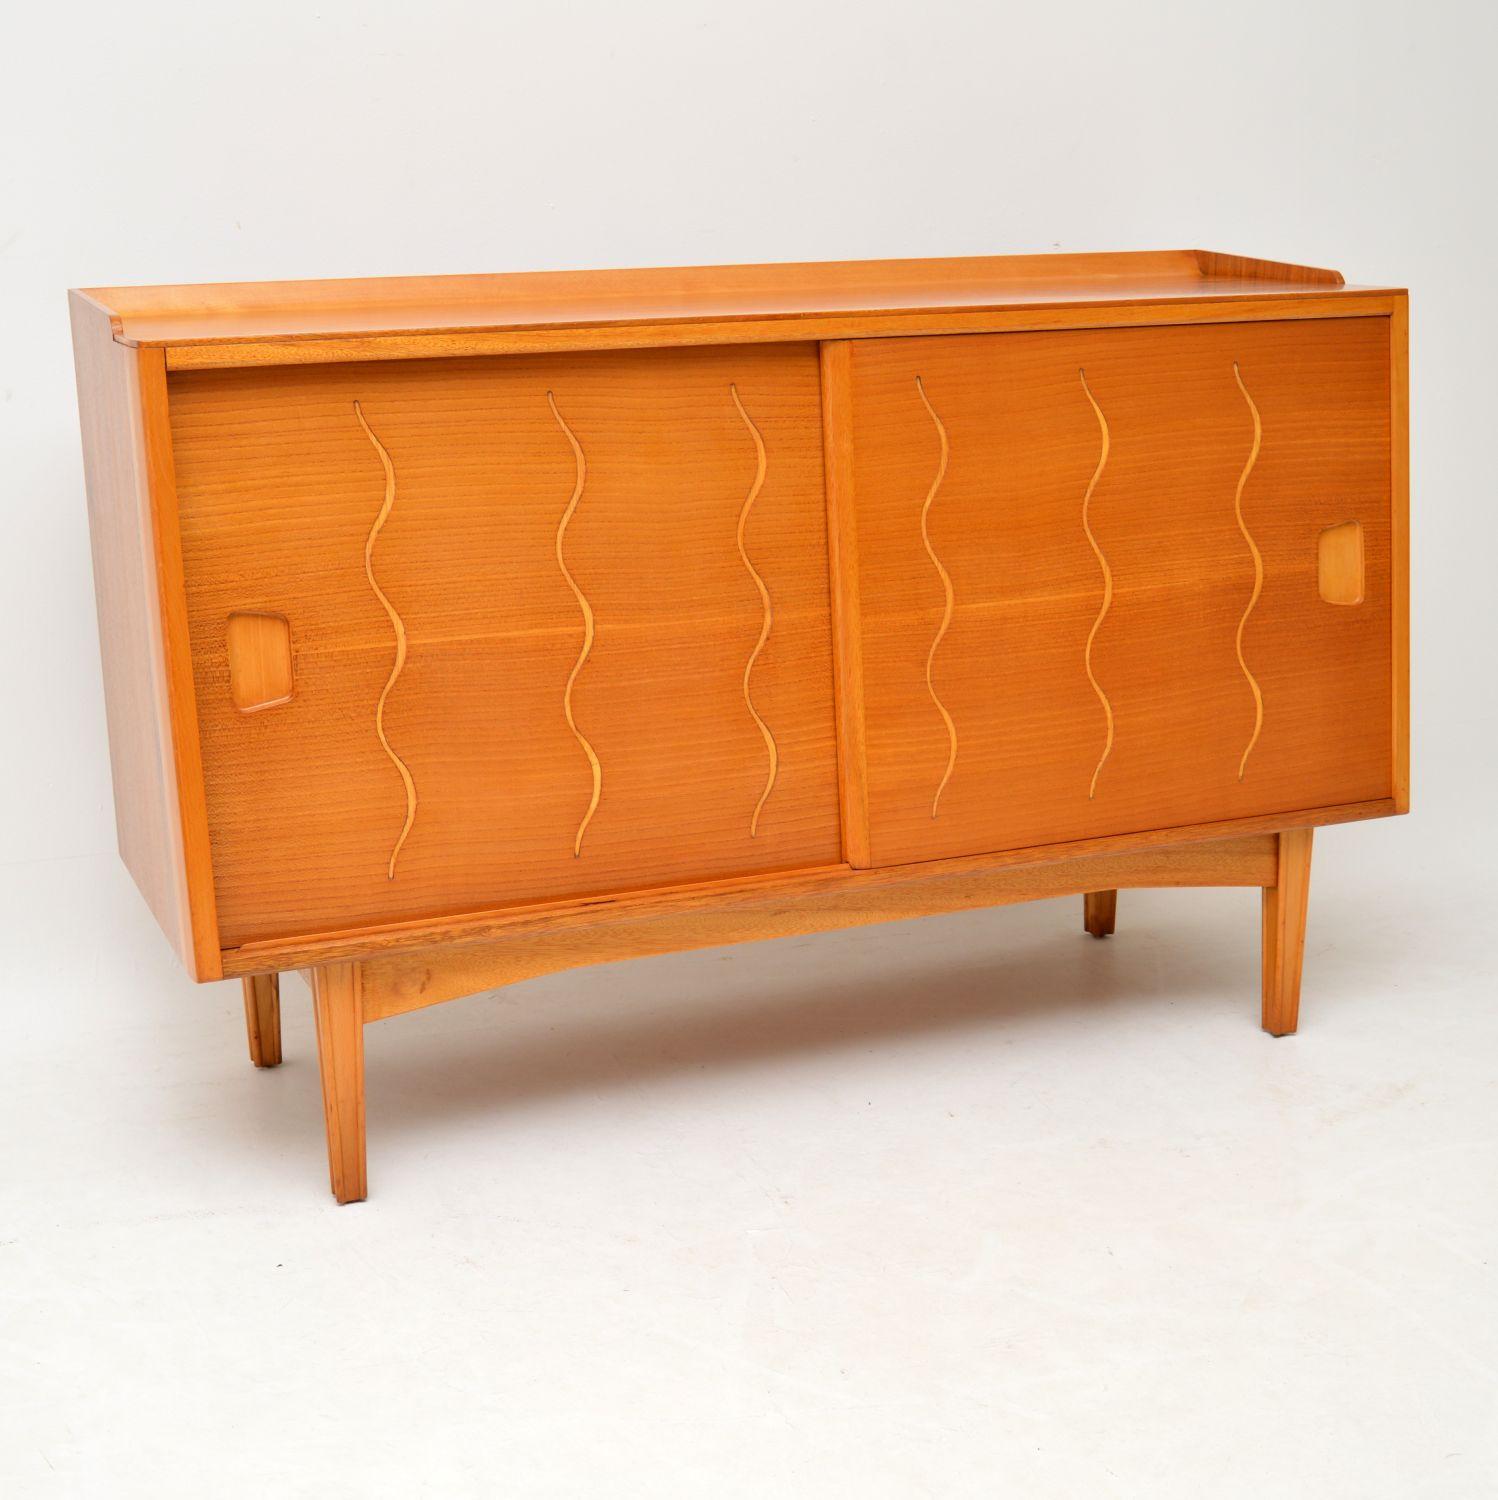 A stunning and very unusual vintage elm and walnut sideboard by Ian Audley for GW Evans. This was made in England, it dates from the 1950’s.

It has has a walnut carcass, elm sliding doors and lovely grooved etched patterns in a half helix design on